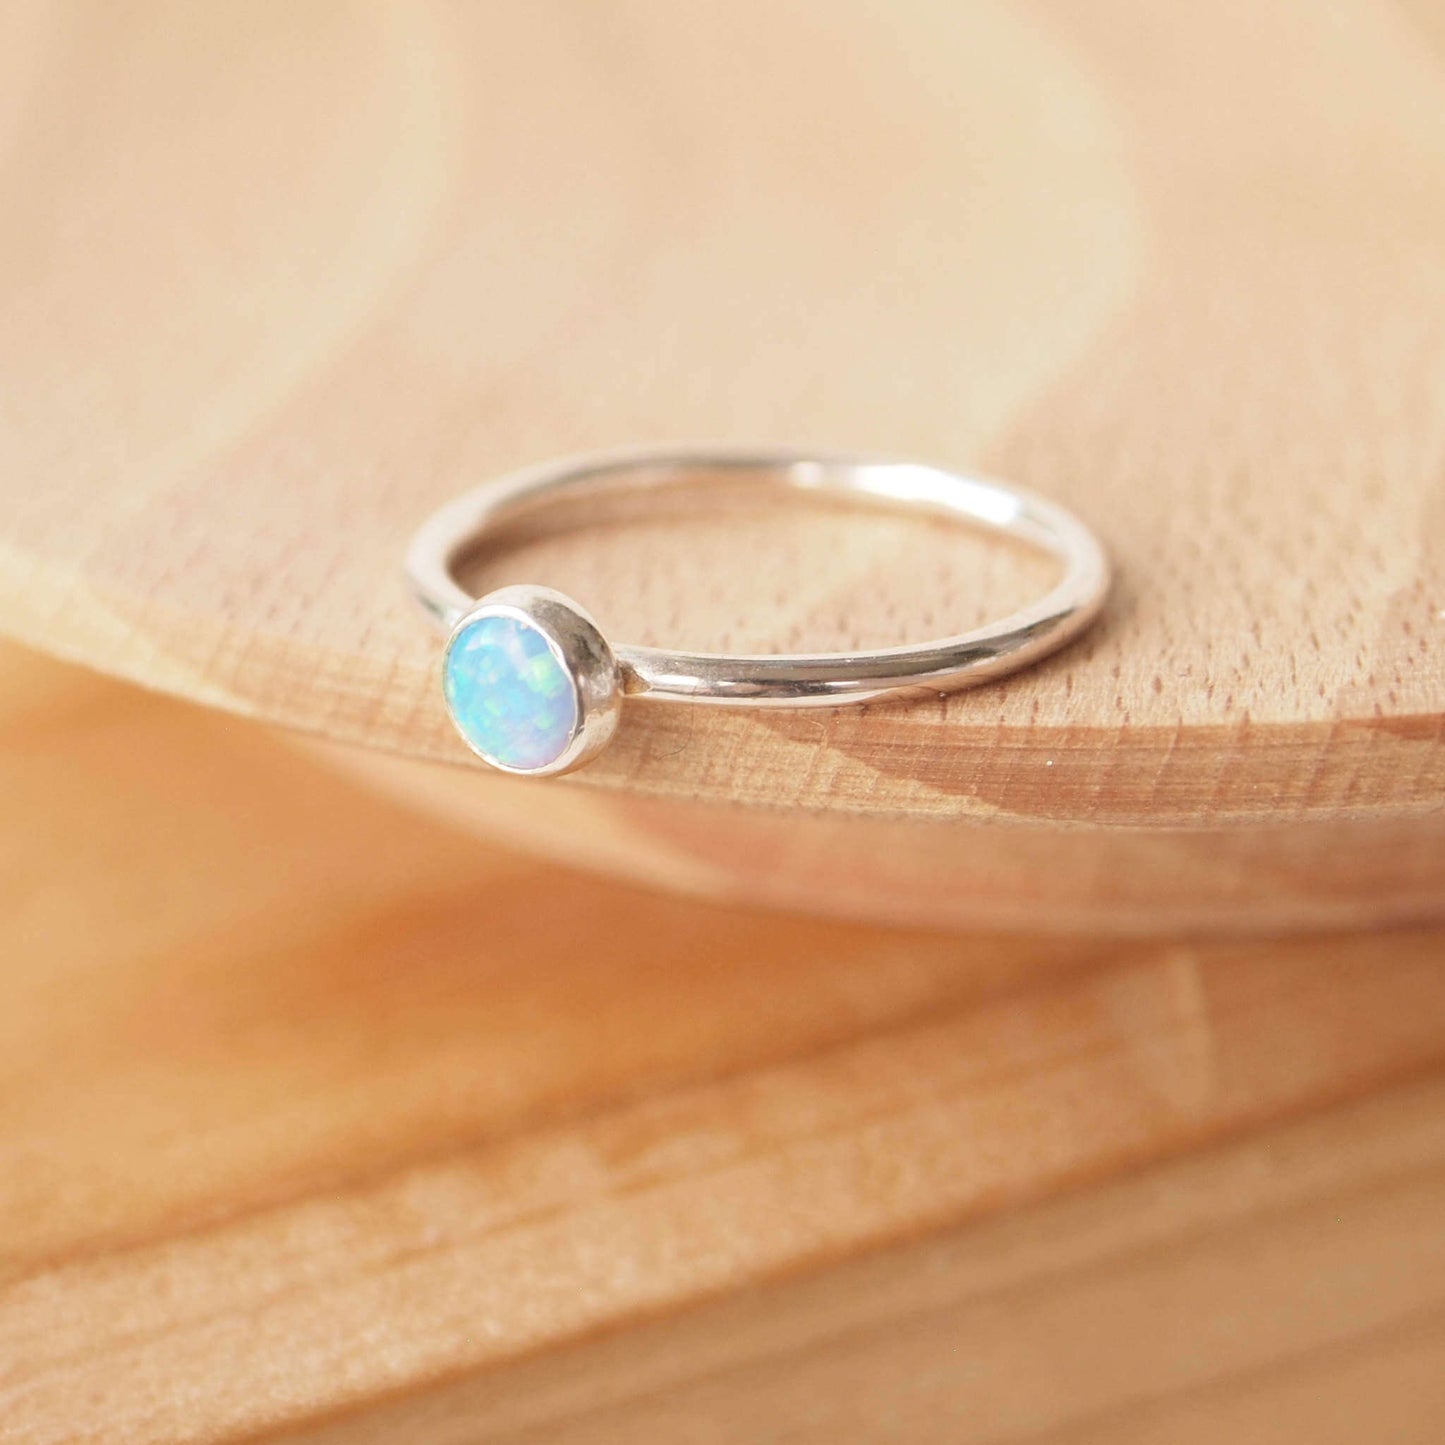 Simple style Lab Opal and Sterling Silver single Solitaire Ring with Lab Opal. Opal is Birthstone for October. THe round 5mm gem is a blue opal with lots of iridescence. Handmade by Maram Jewellery in Scotland